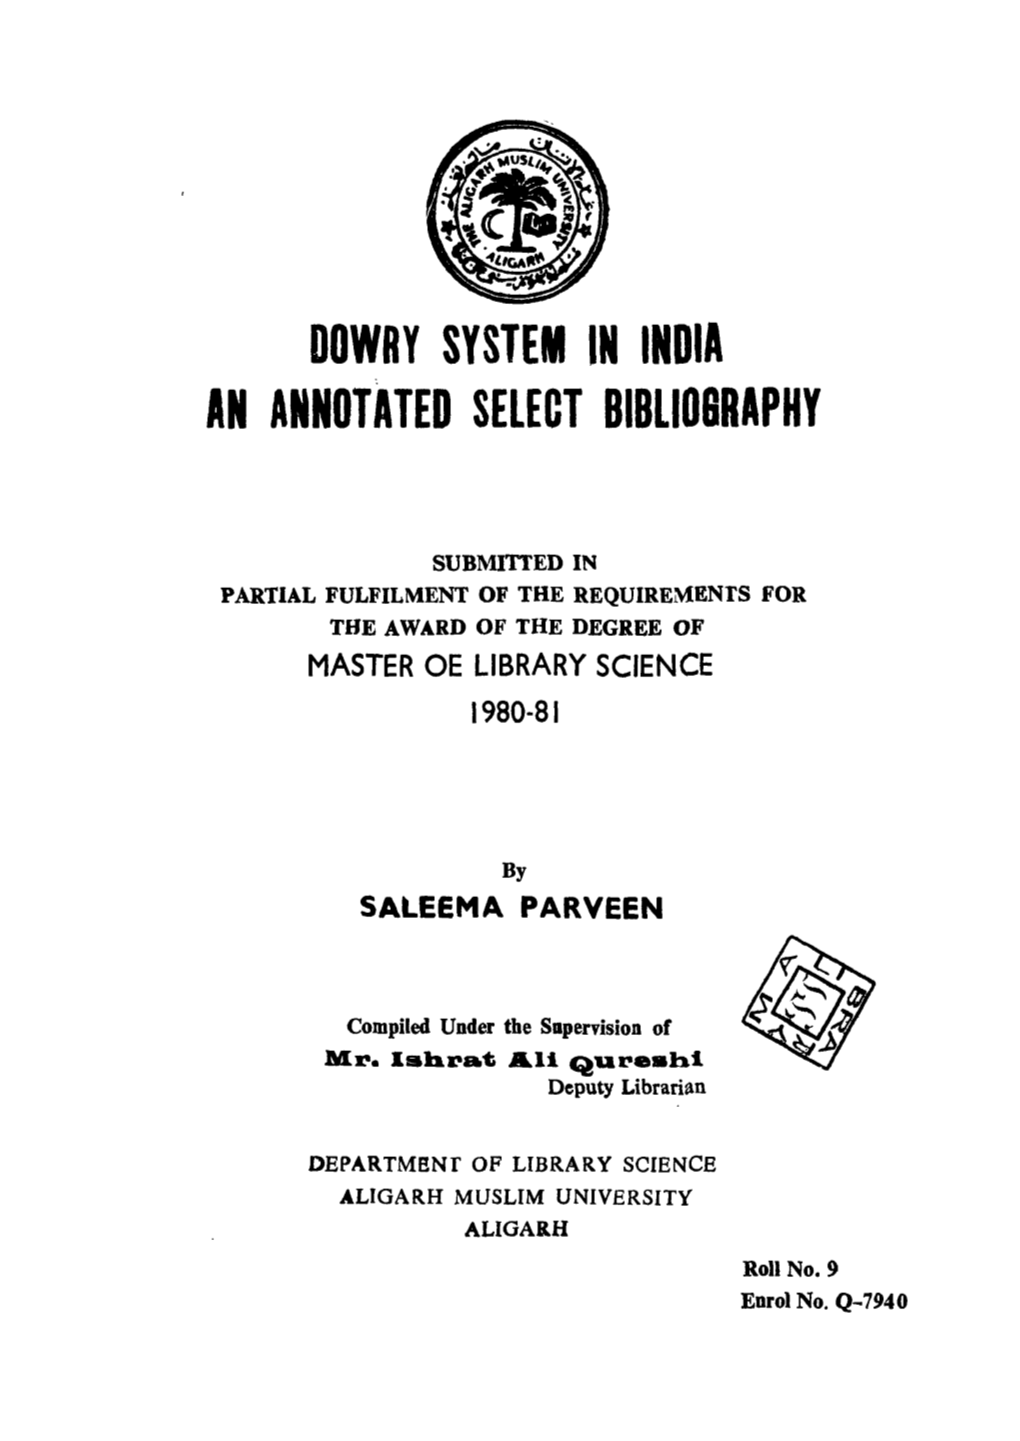 Dowry System in India an Annotated Select Bibli06raphy